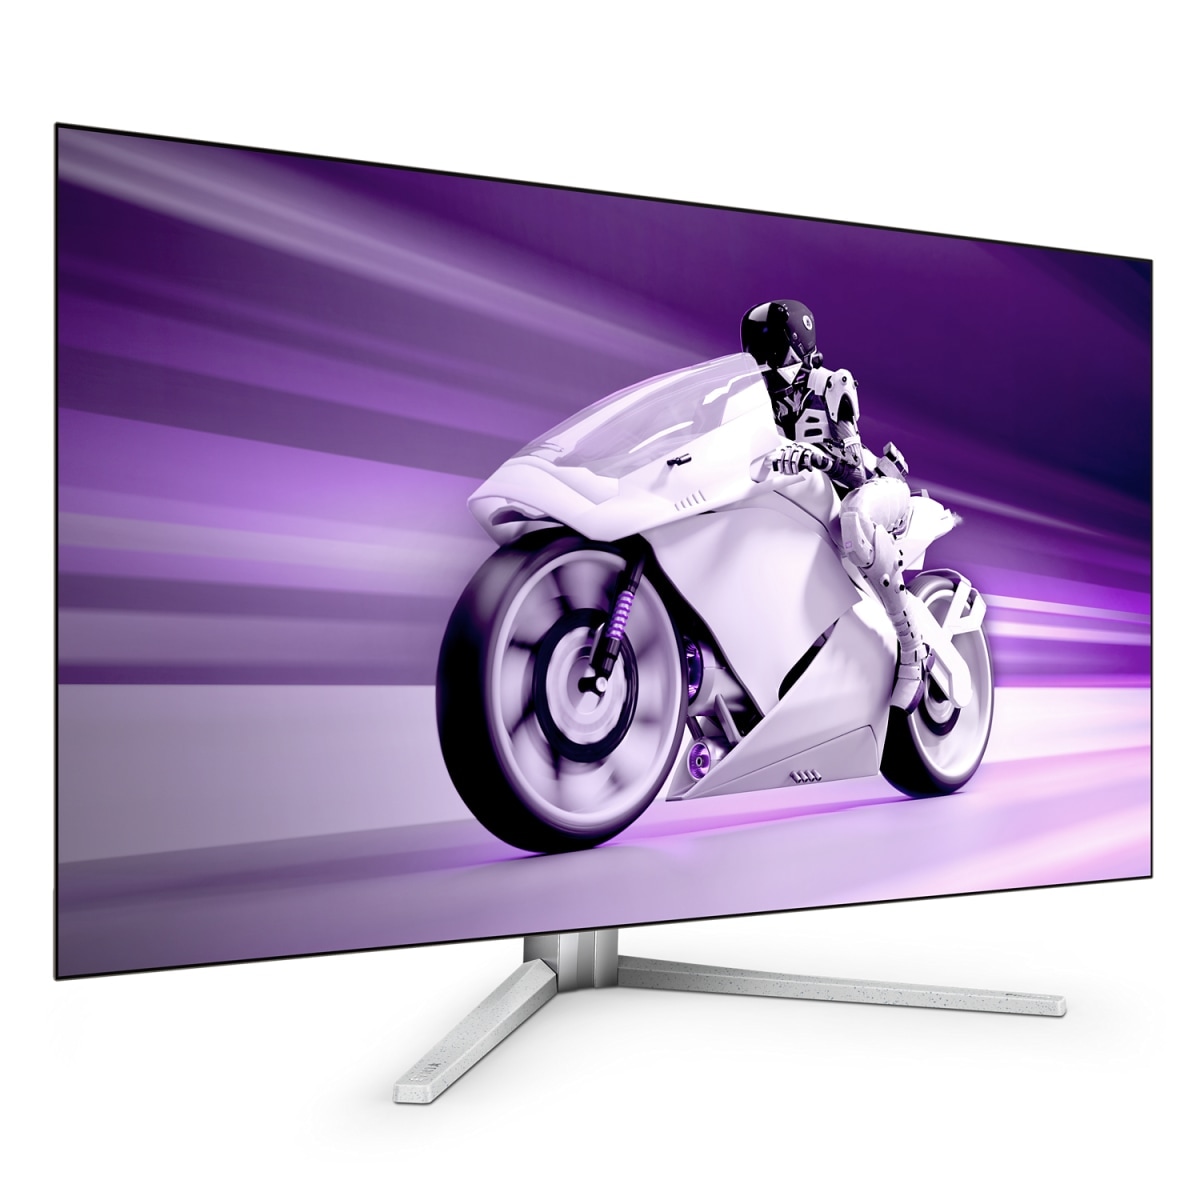 Philips Curved-Gaming-OLED-Monitor »42M2N8900«, 105,5 cm/42 Zoll, 3440 x 1440 px, 0,1 ms Reaktionszeit, 175 Hz